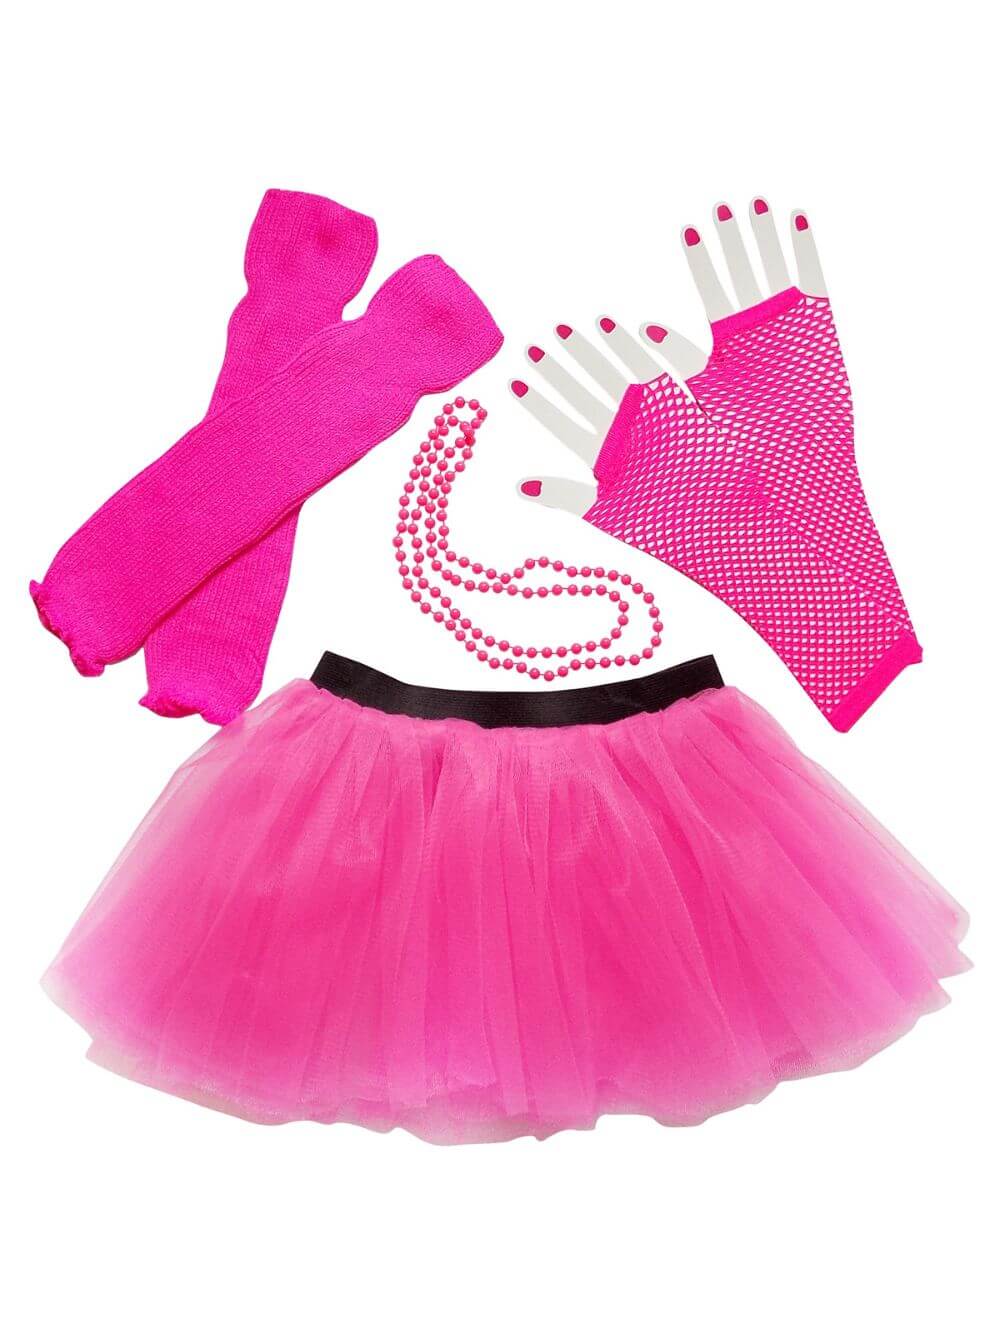 Adult, Plus Hot Pink 80's Tutu Skirt Costume, Fast Shipping